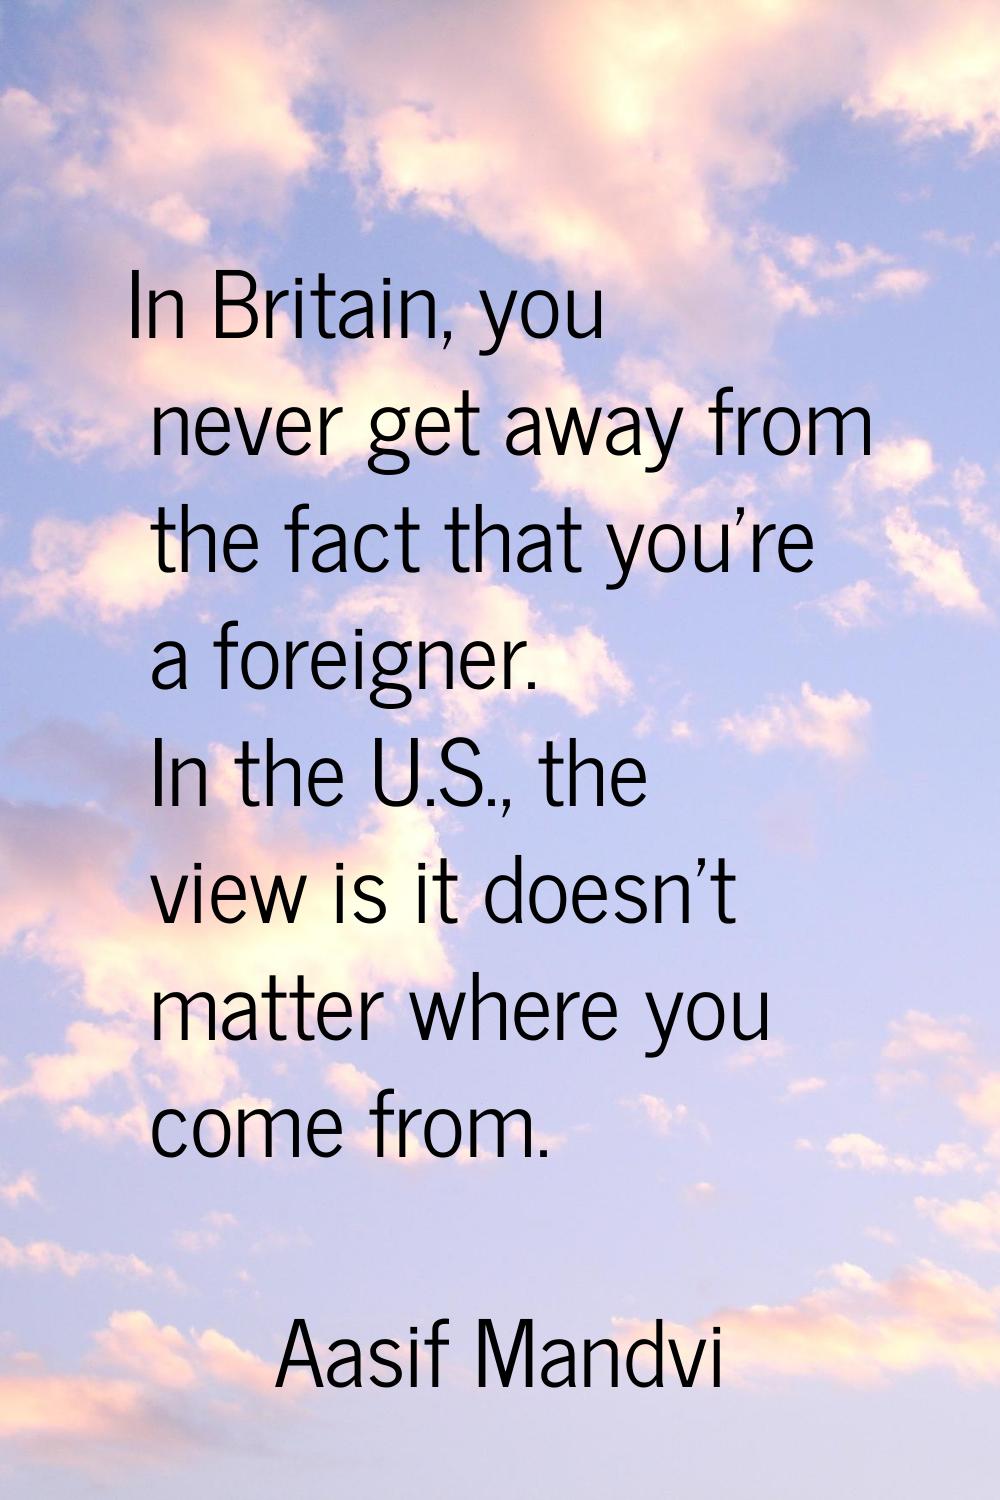 In Britain, you never get away from the fact that you're a foreigner. In the U.S., the view is it d